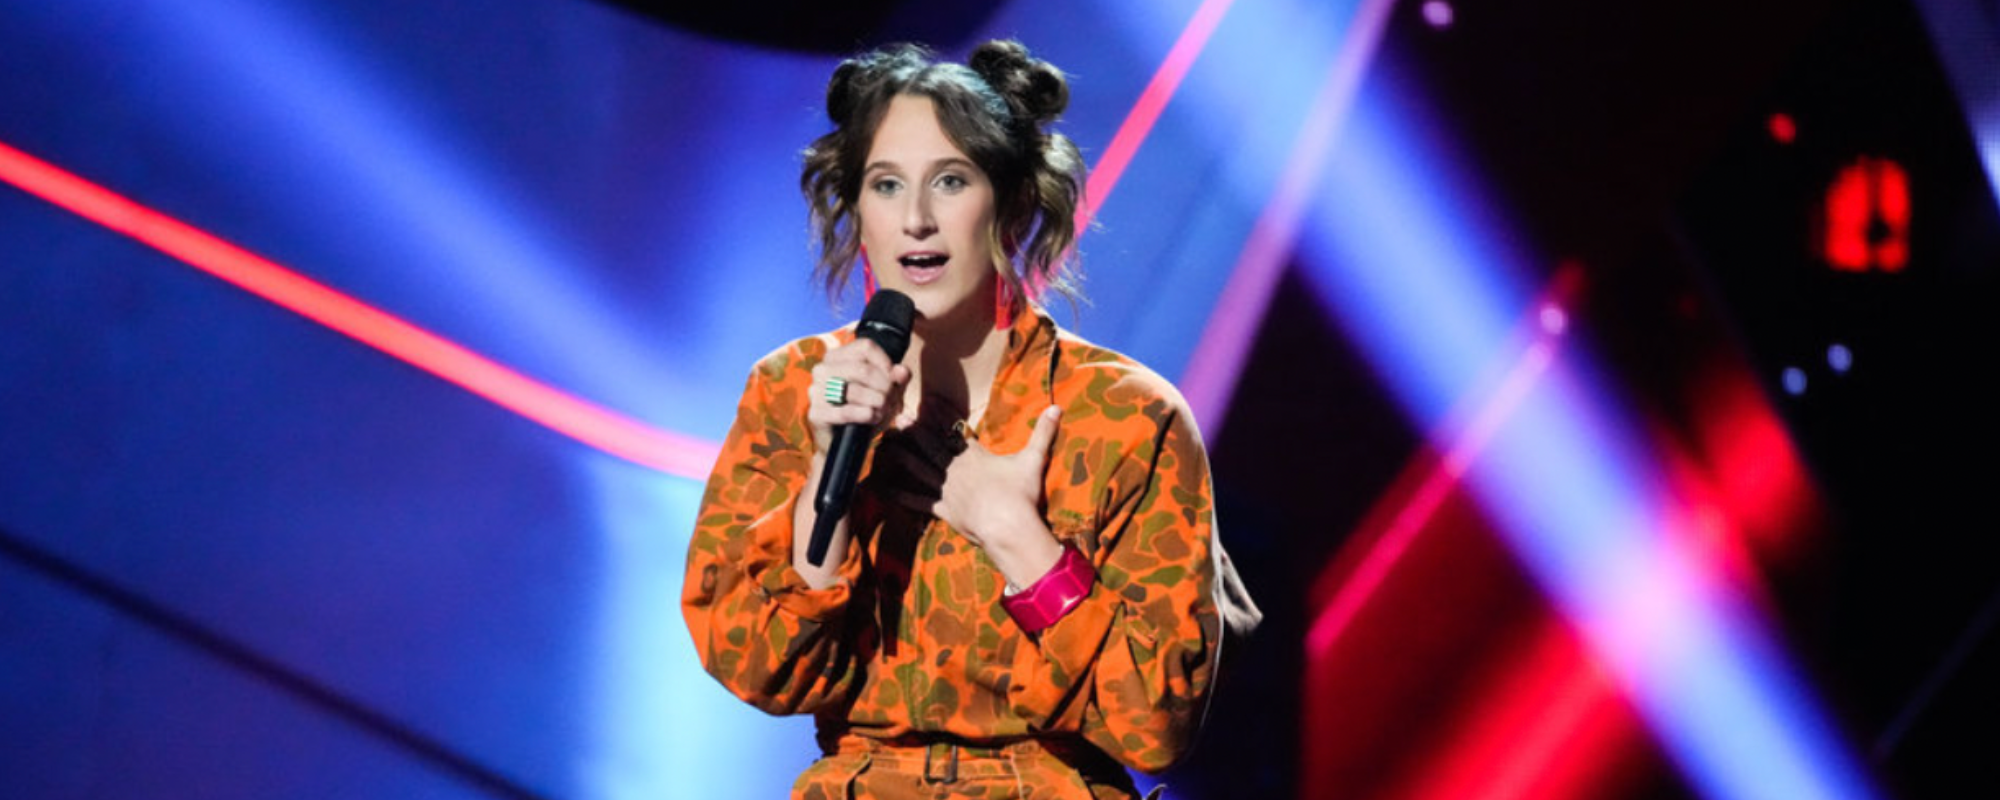 Laura Littleton Joins Niall Horan’s ‘The Voice’ Team After a Harry Styles Cover